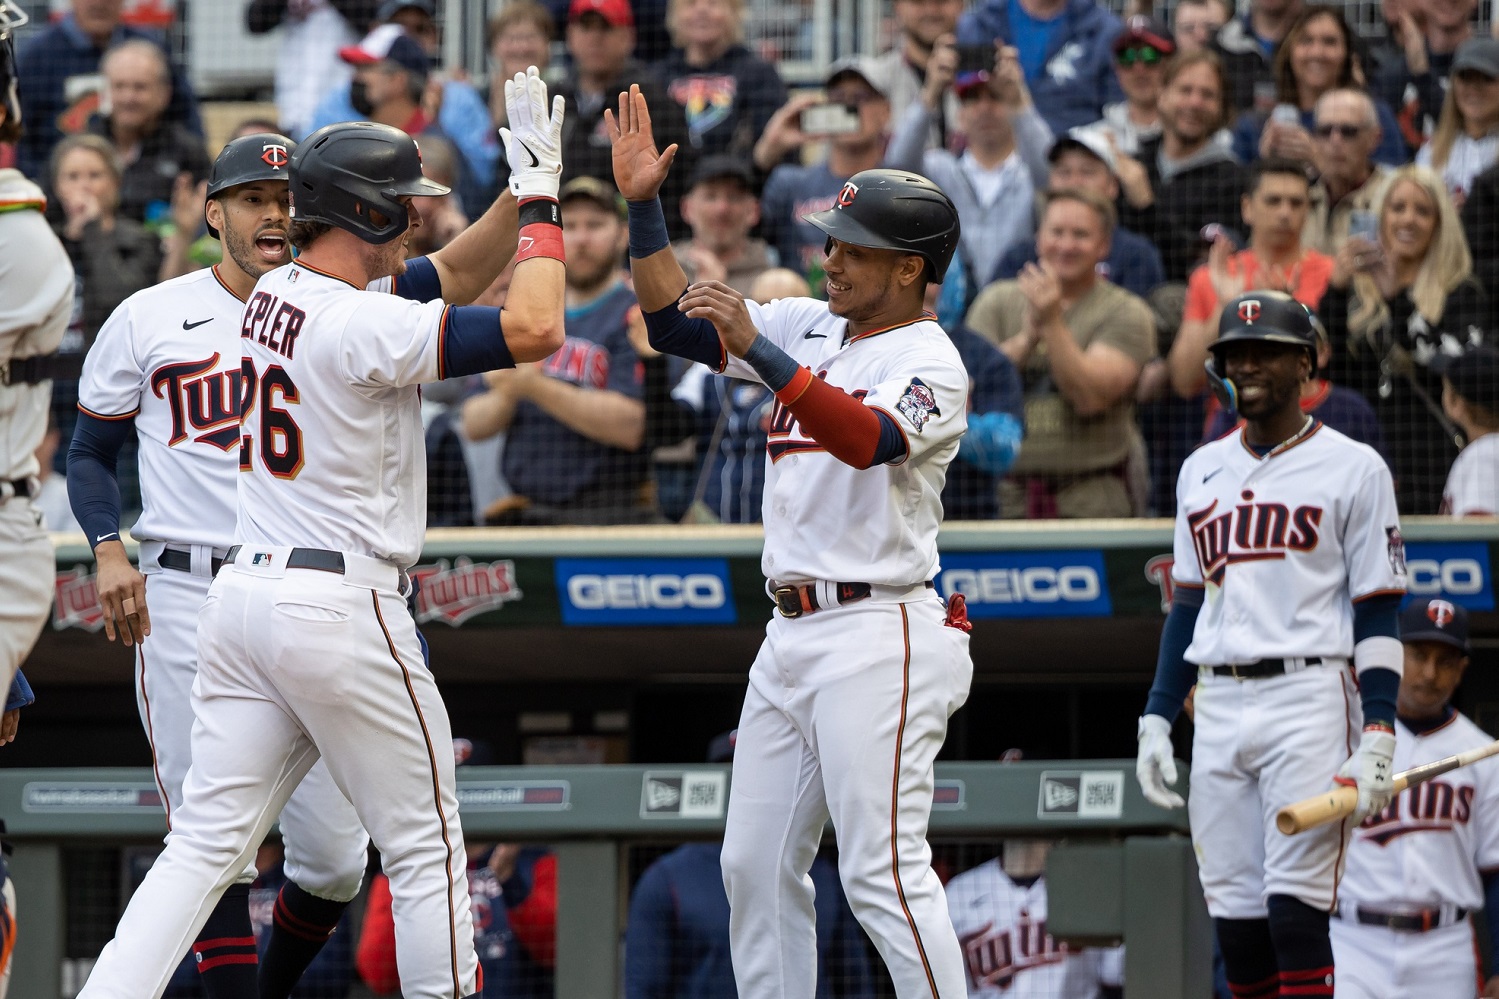 Max Kepler And Jorge Polanco Sign Extensions With Twins - The